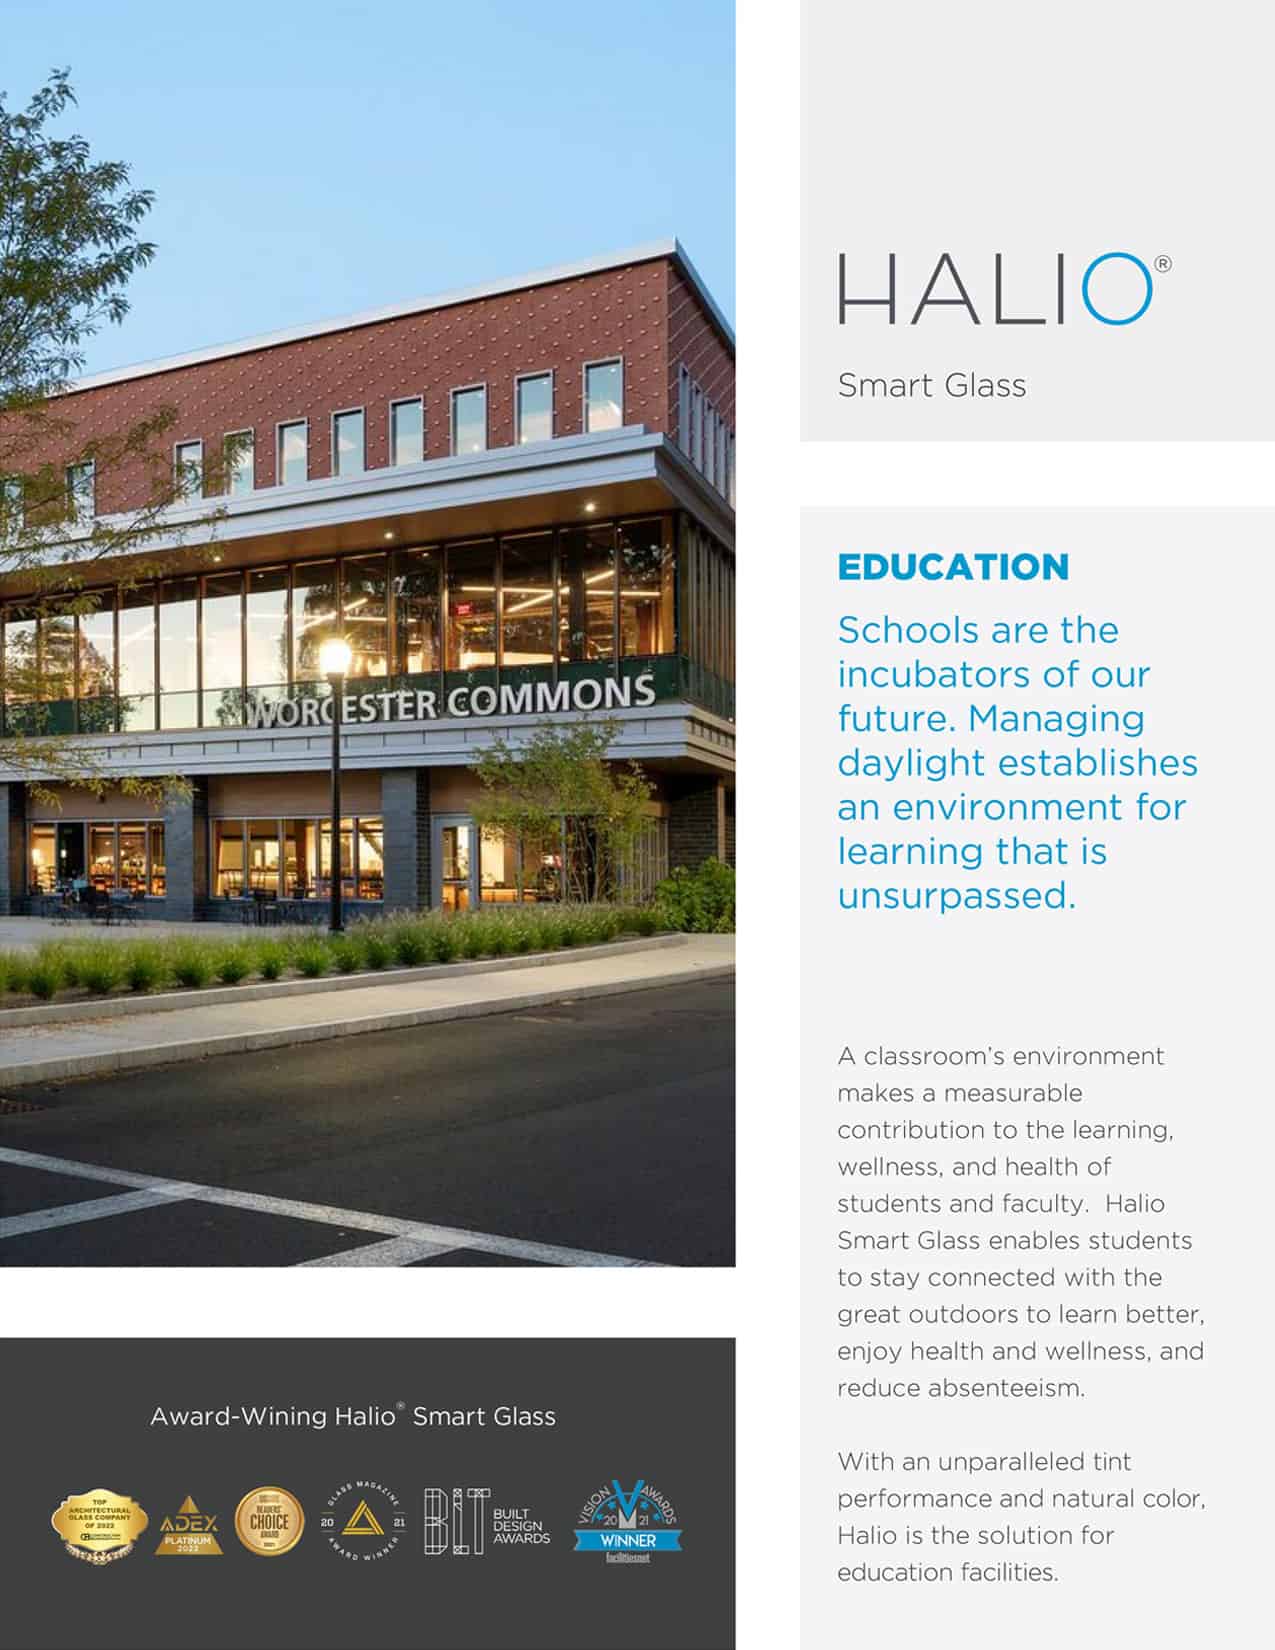 HALIO for Higher Education